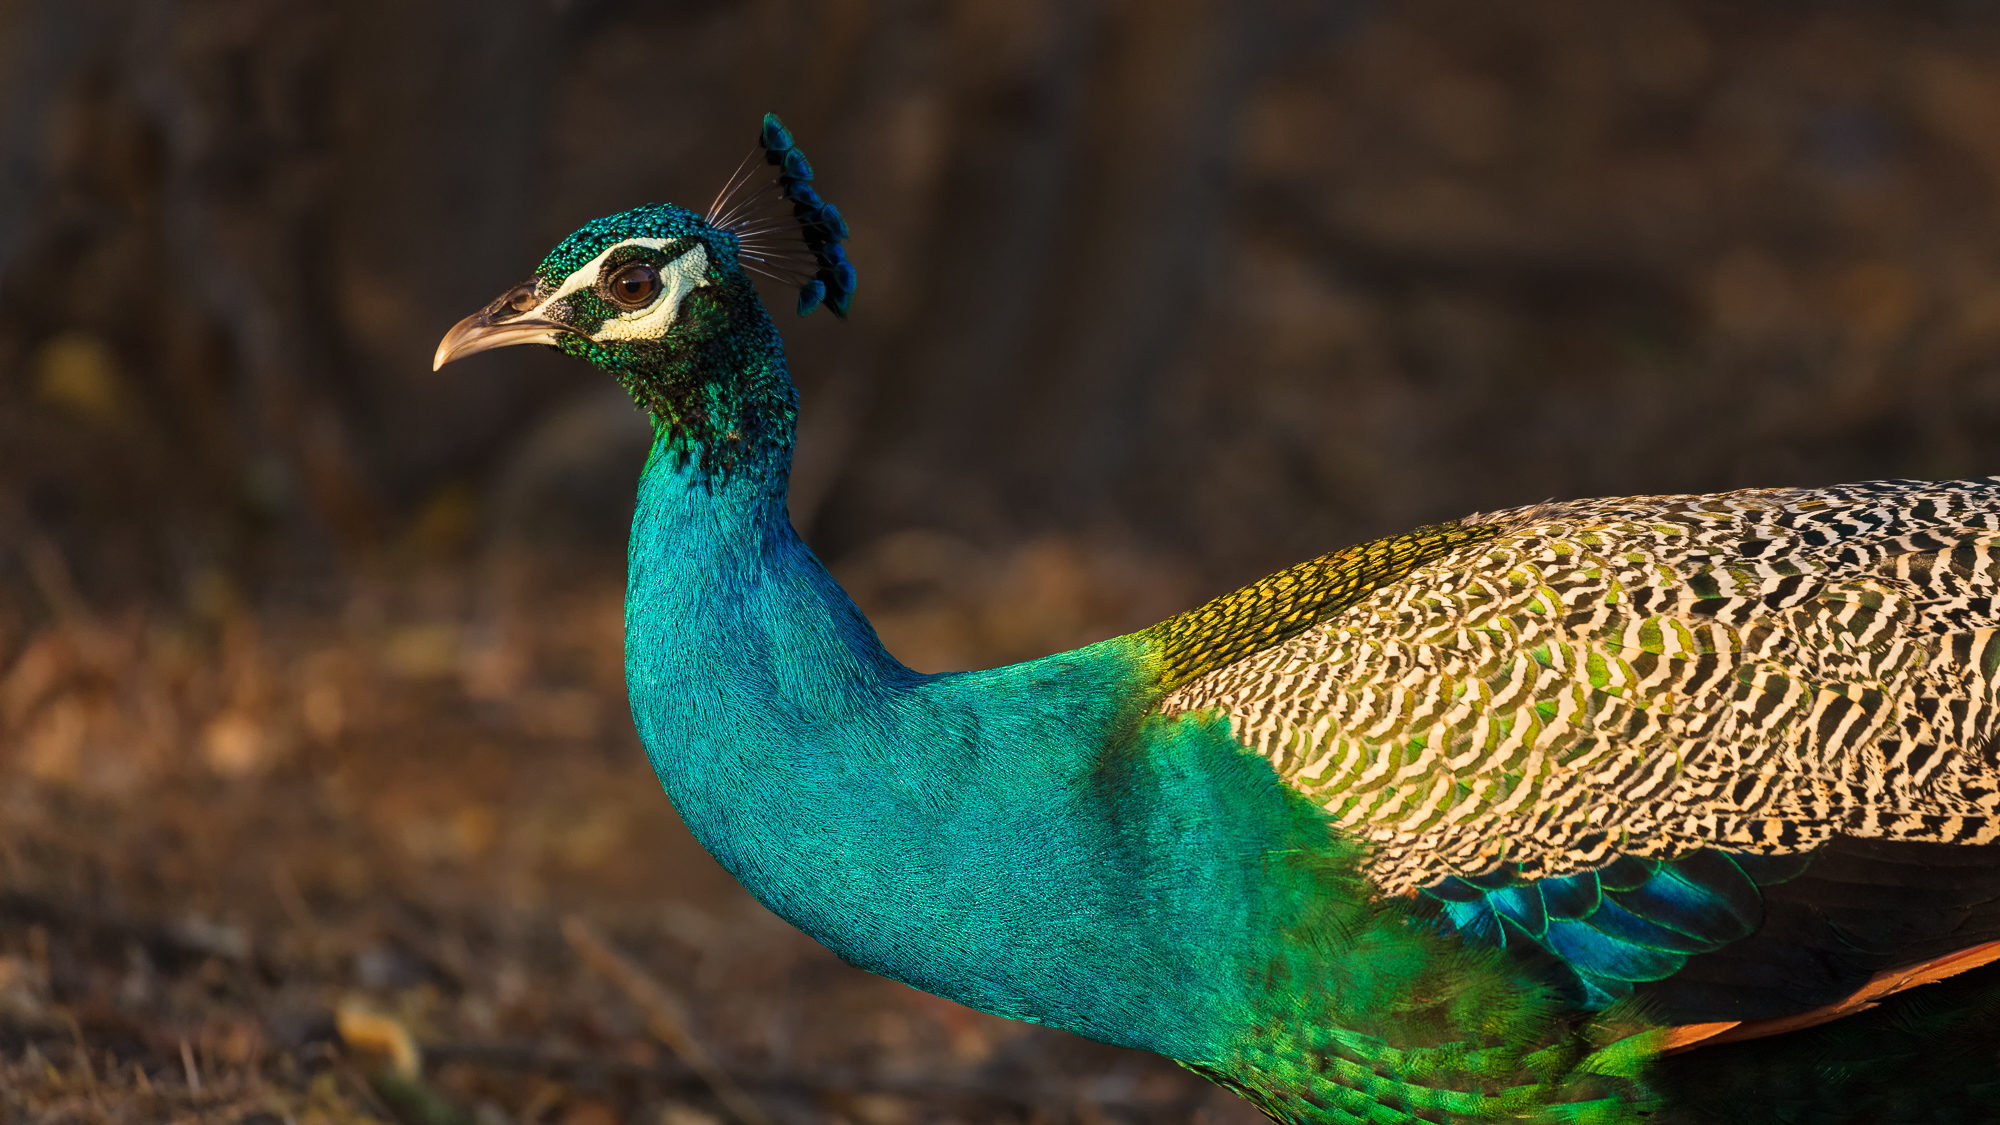 The Peacock – The National Bird Of India